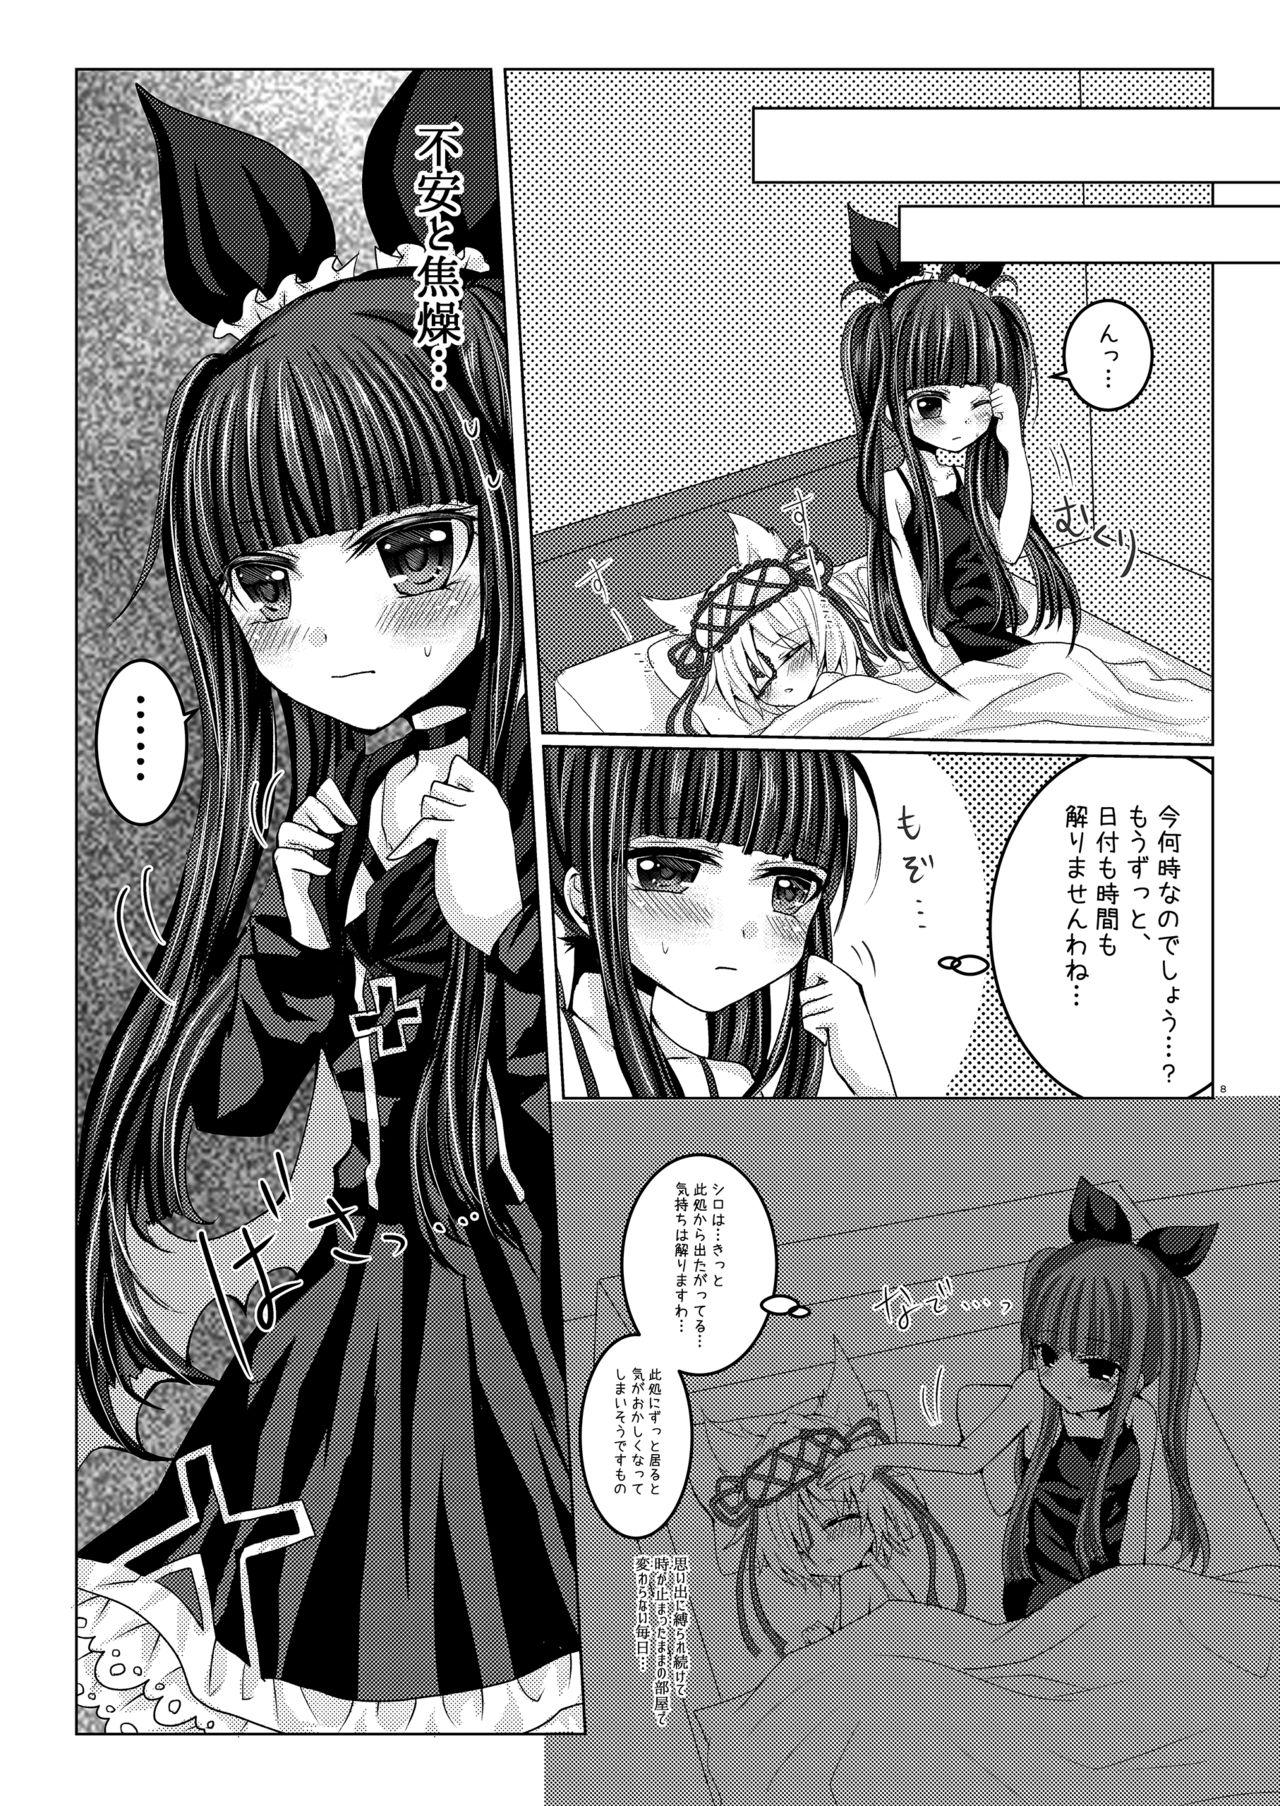 Abuse Torikago Shoujo - Emil chronicle online Indian Sex - Page 7